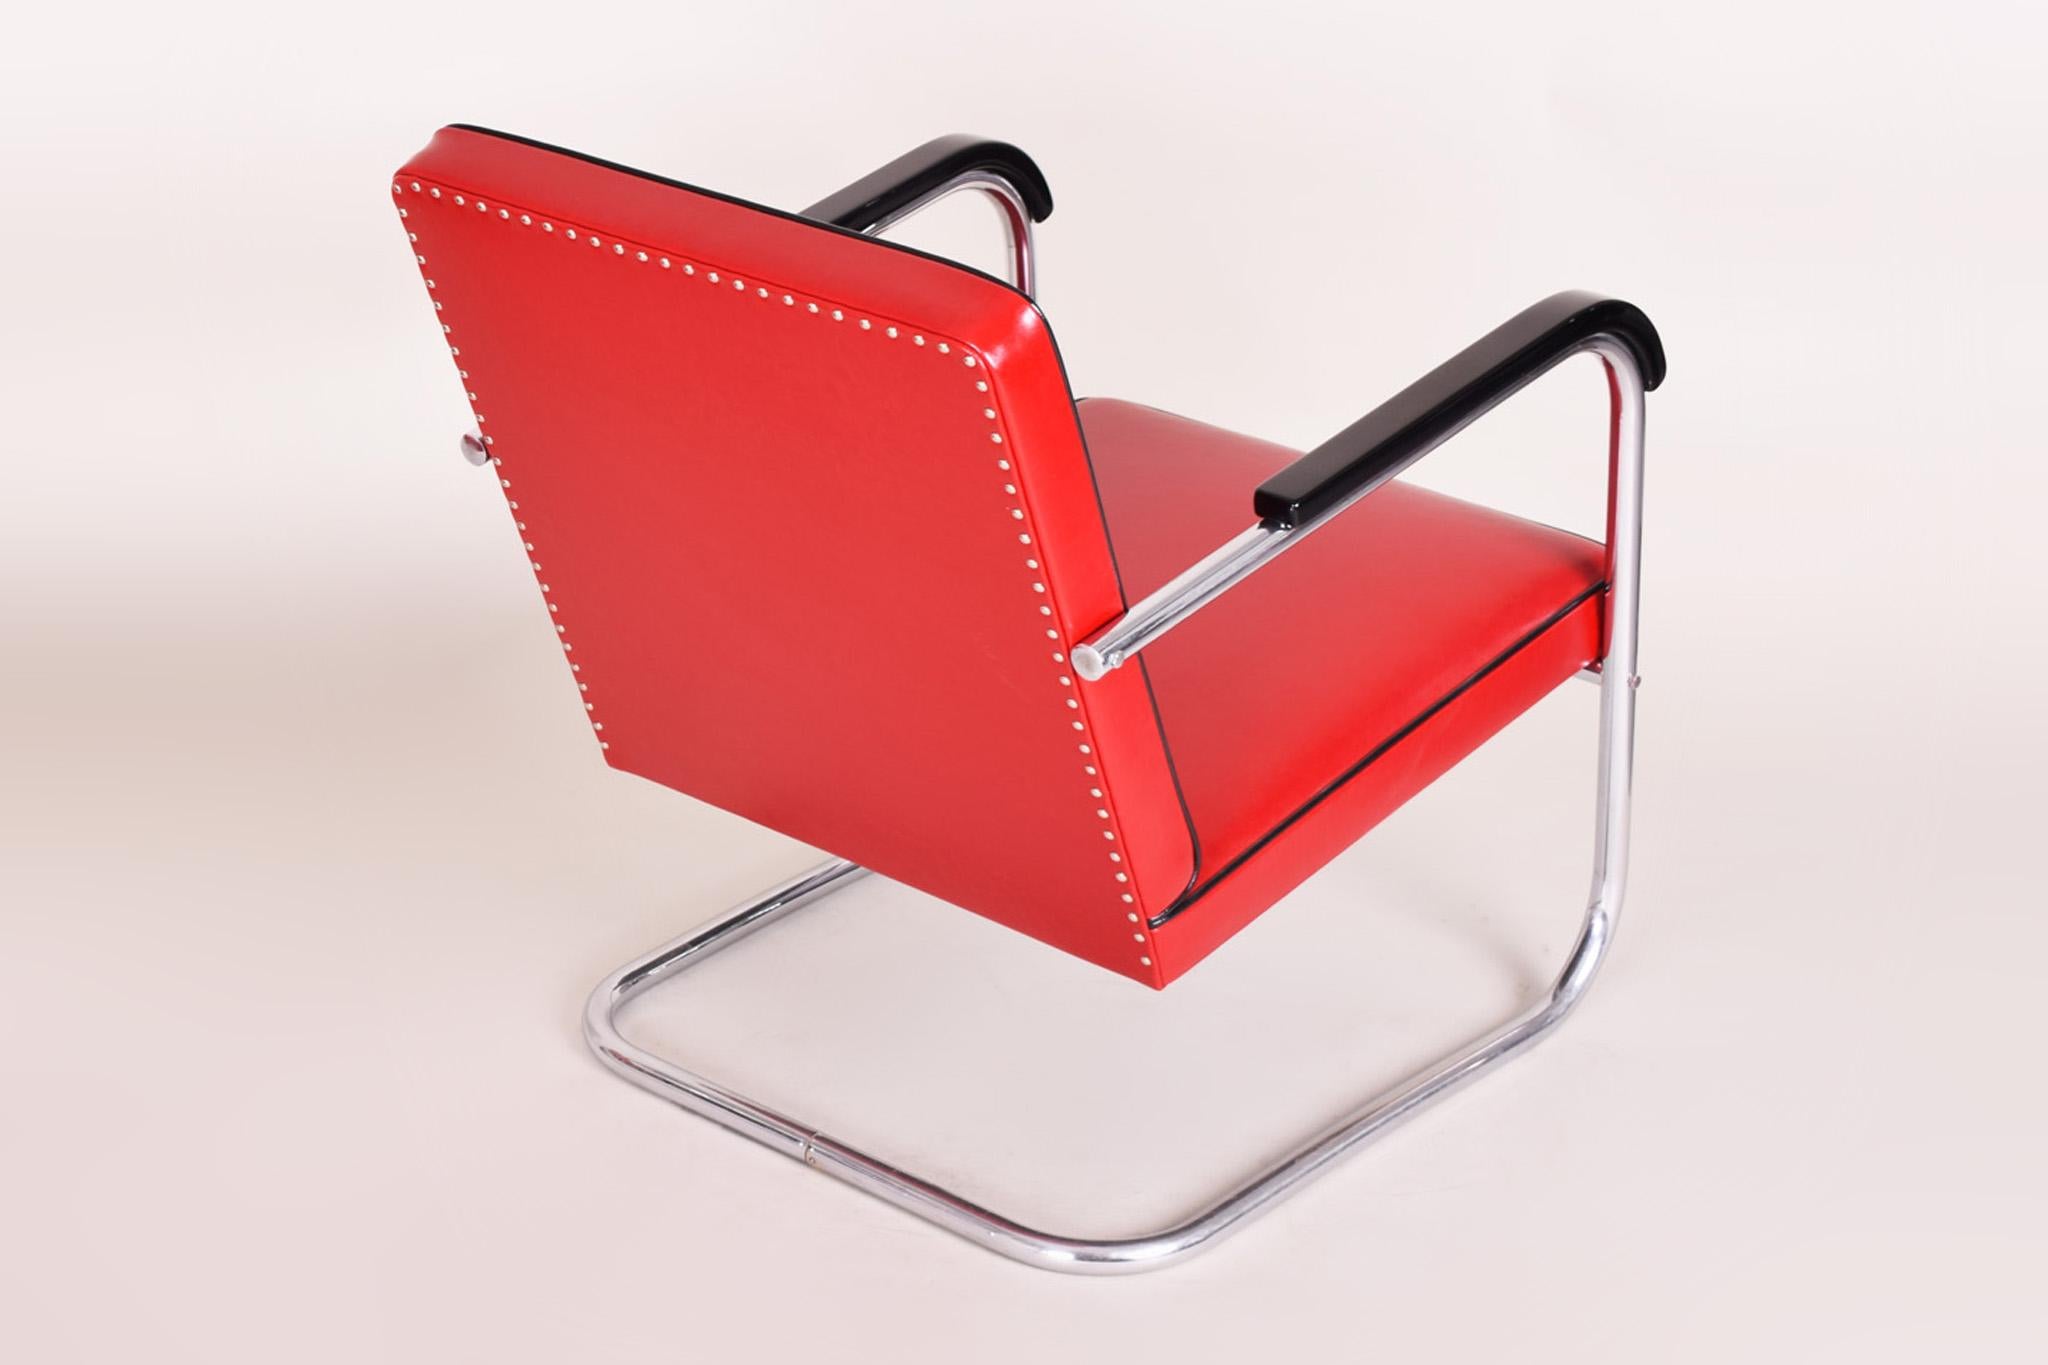 Bauhaus Red Tubular Thonet Armchair by Anton Lorenz, New Leather Upholstery, 1930s For Sale